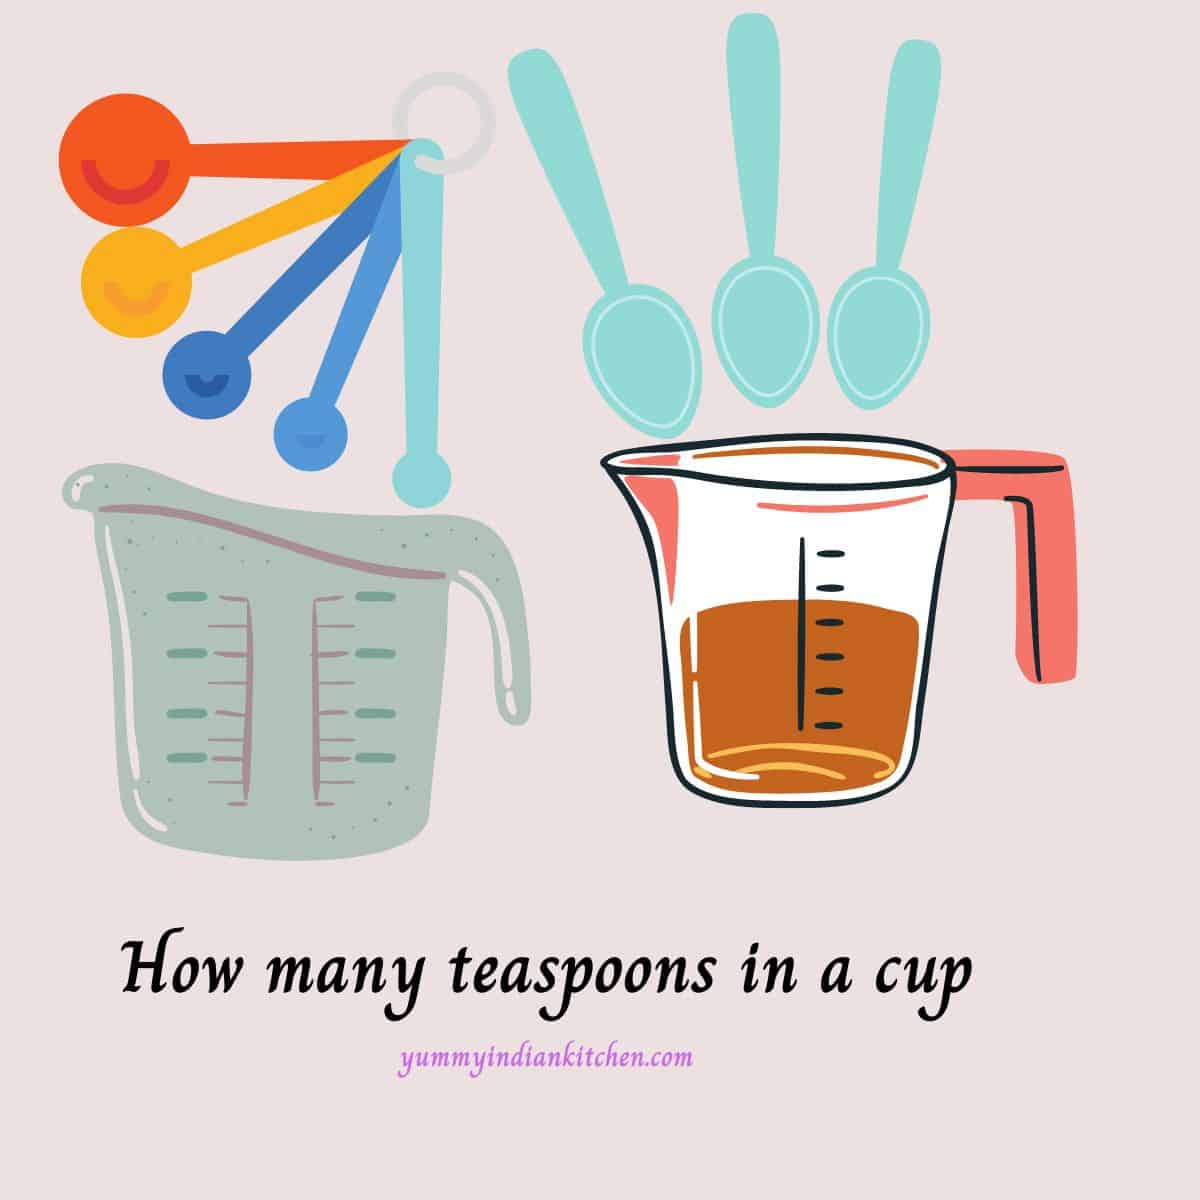 How many teaspoons in a cup, 1/2 cup - Yummy Indian Kitchen